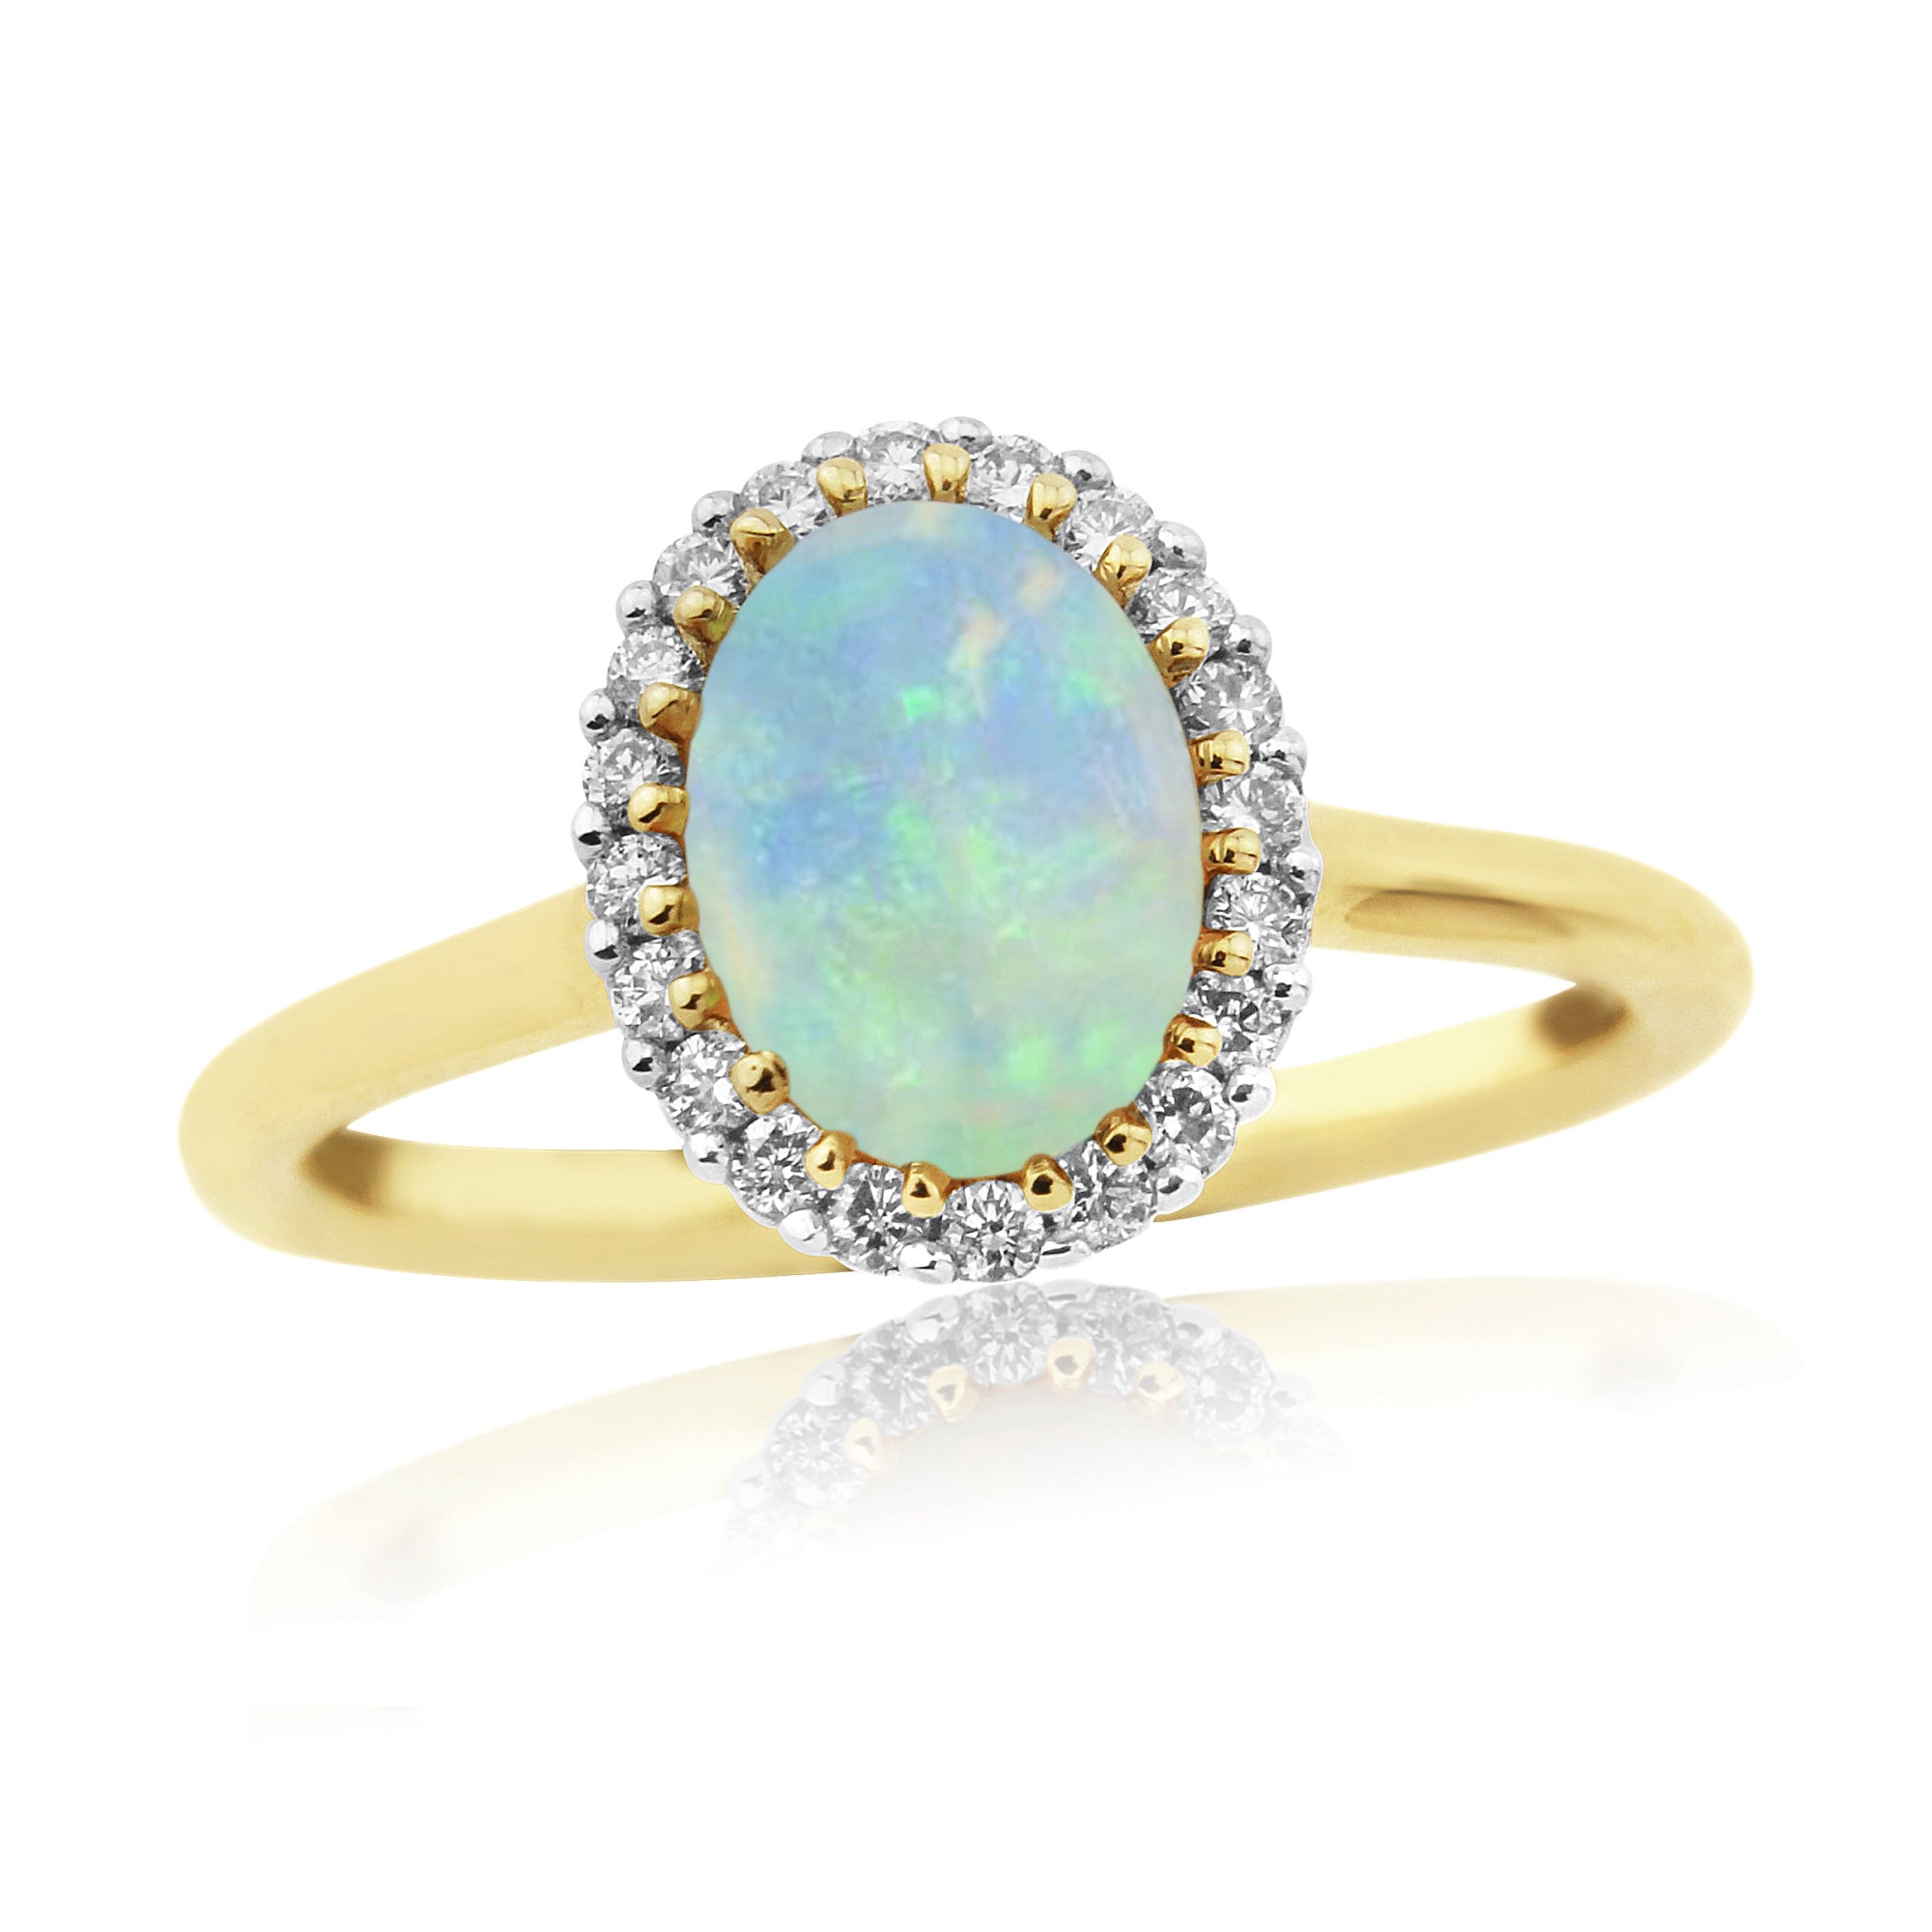 9ct gold 8x6mm oval opal & diamond cluster ring 0.16ct